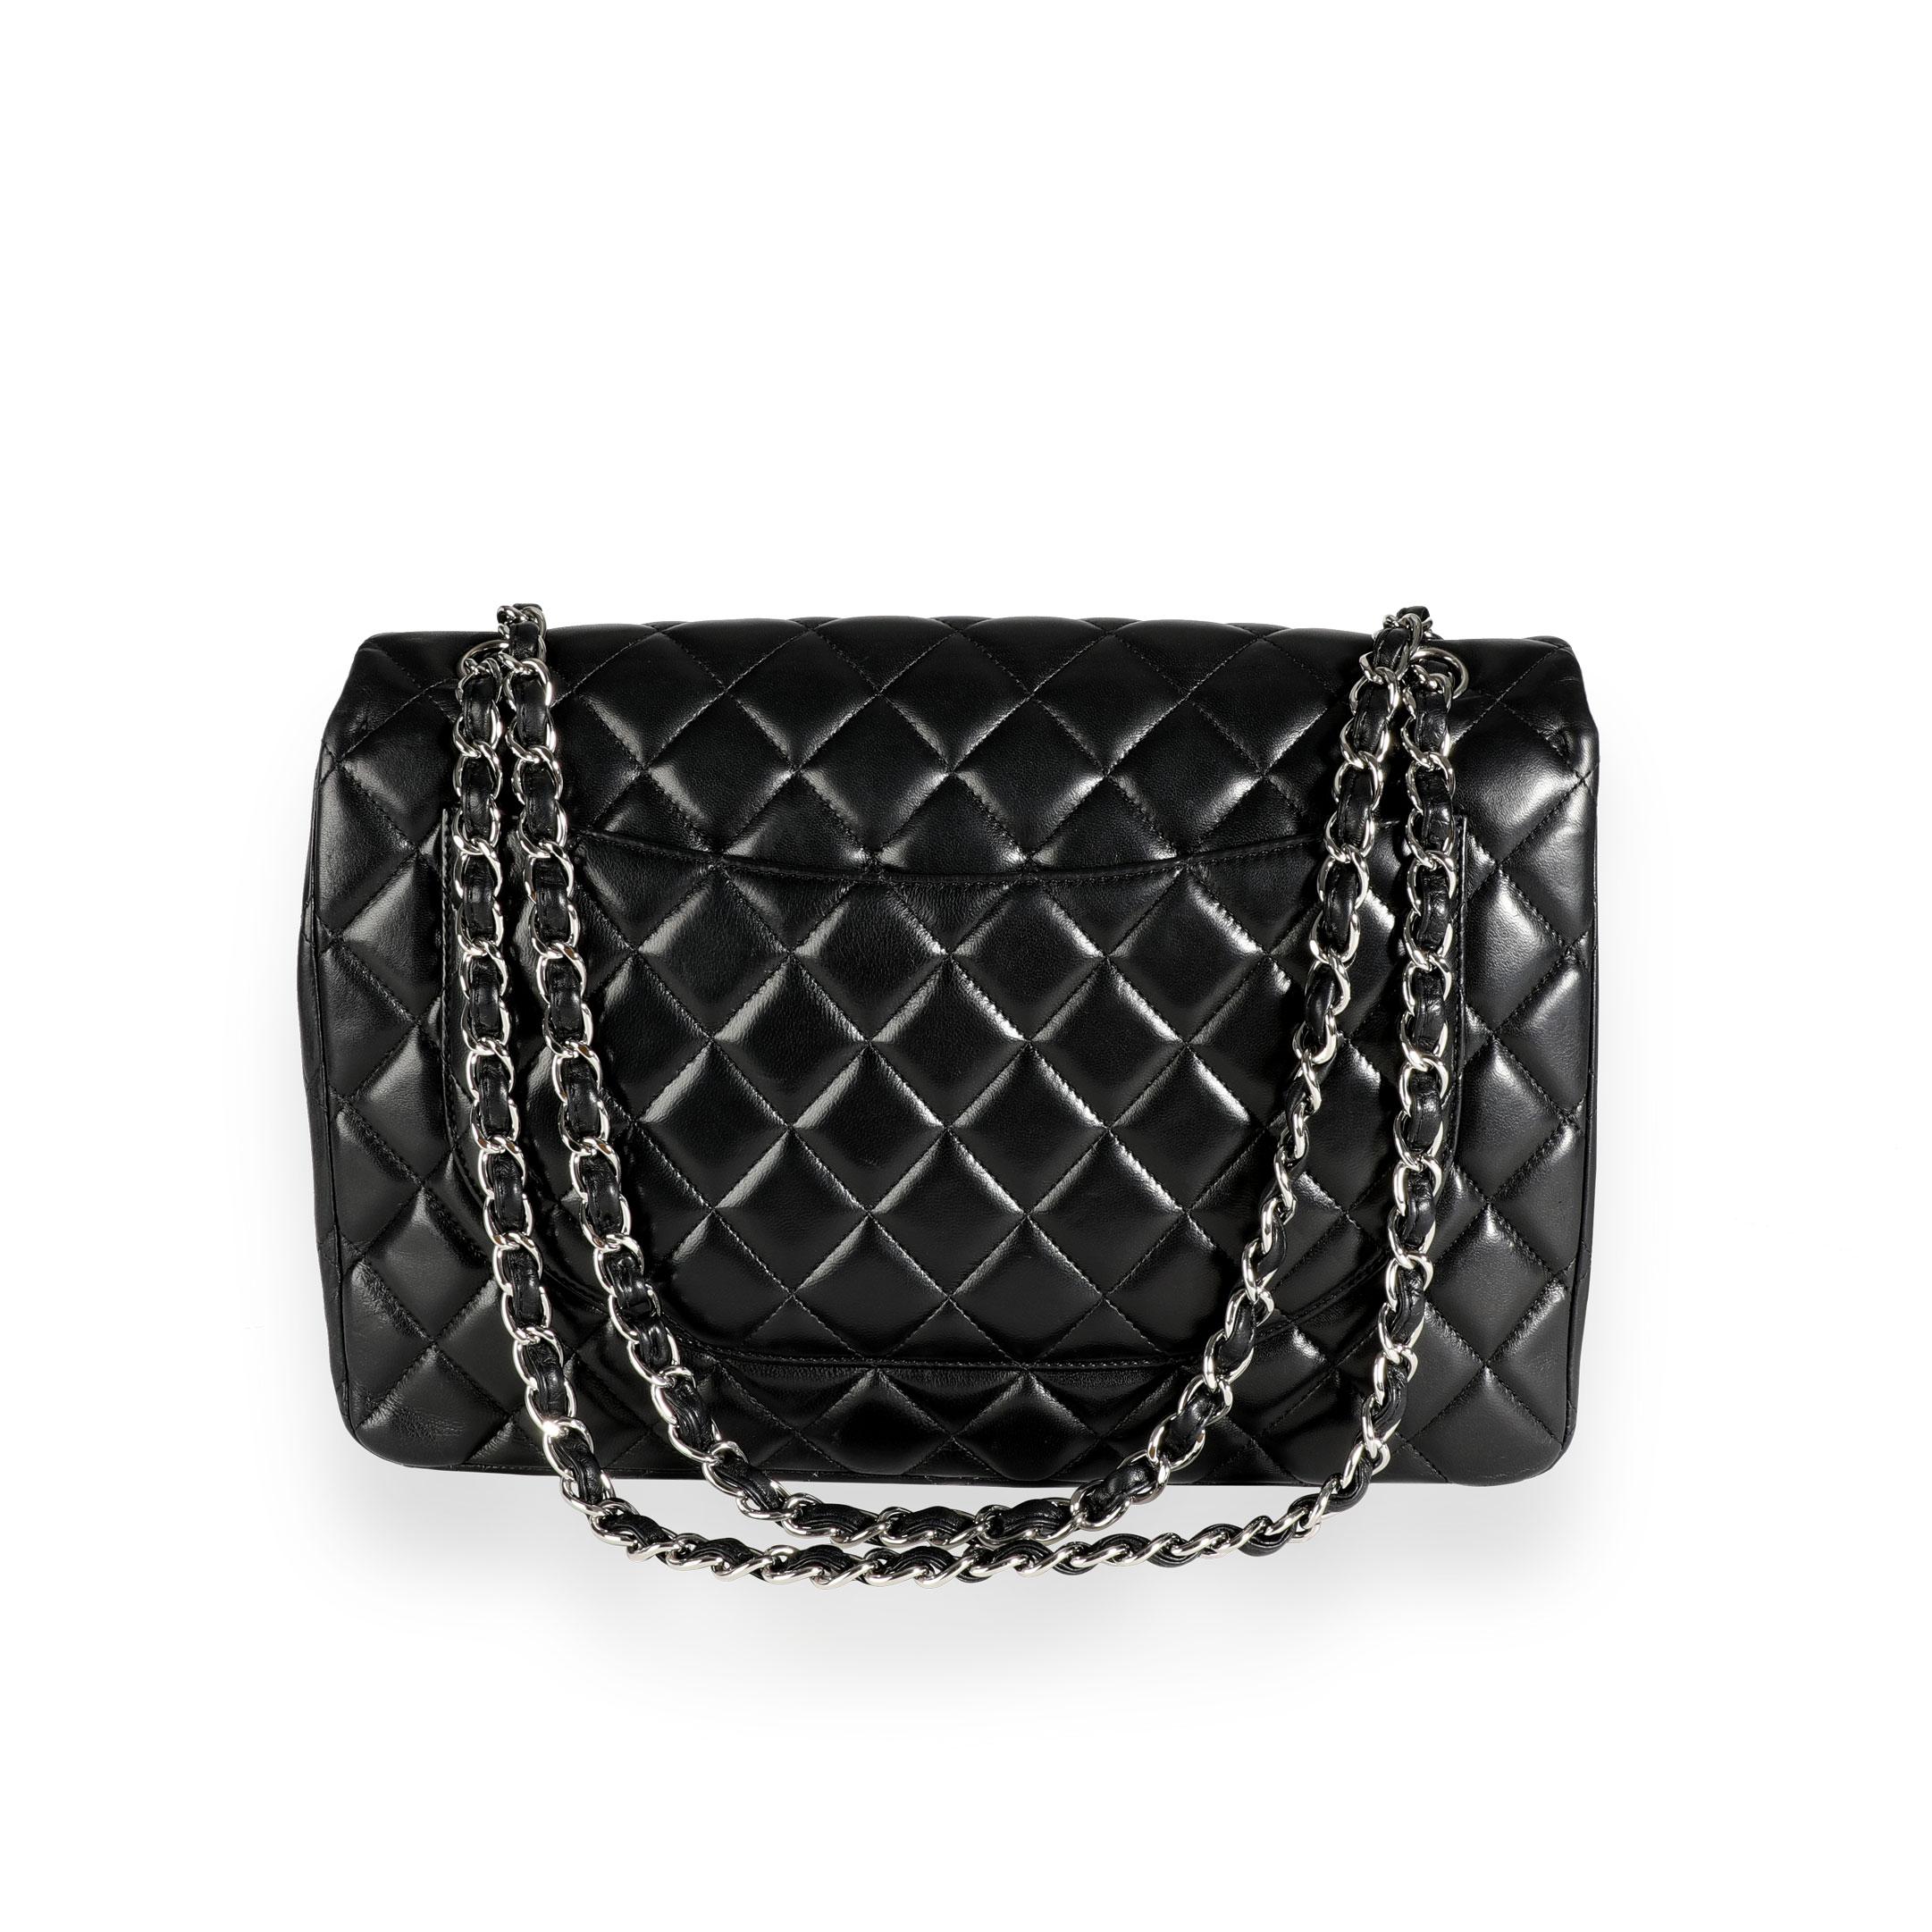 Chanel Black Quilted Maxi Classic Single Flap Bag 2